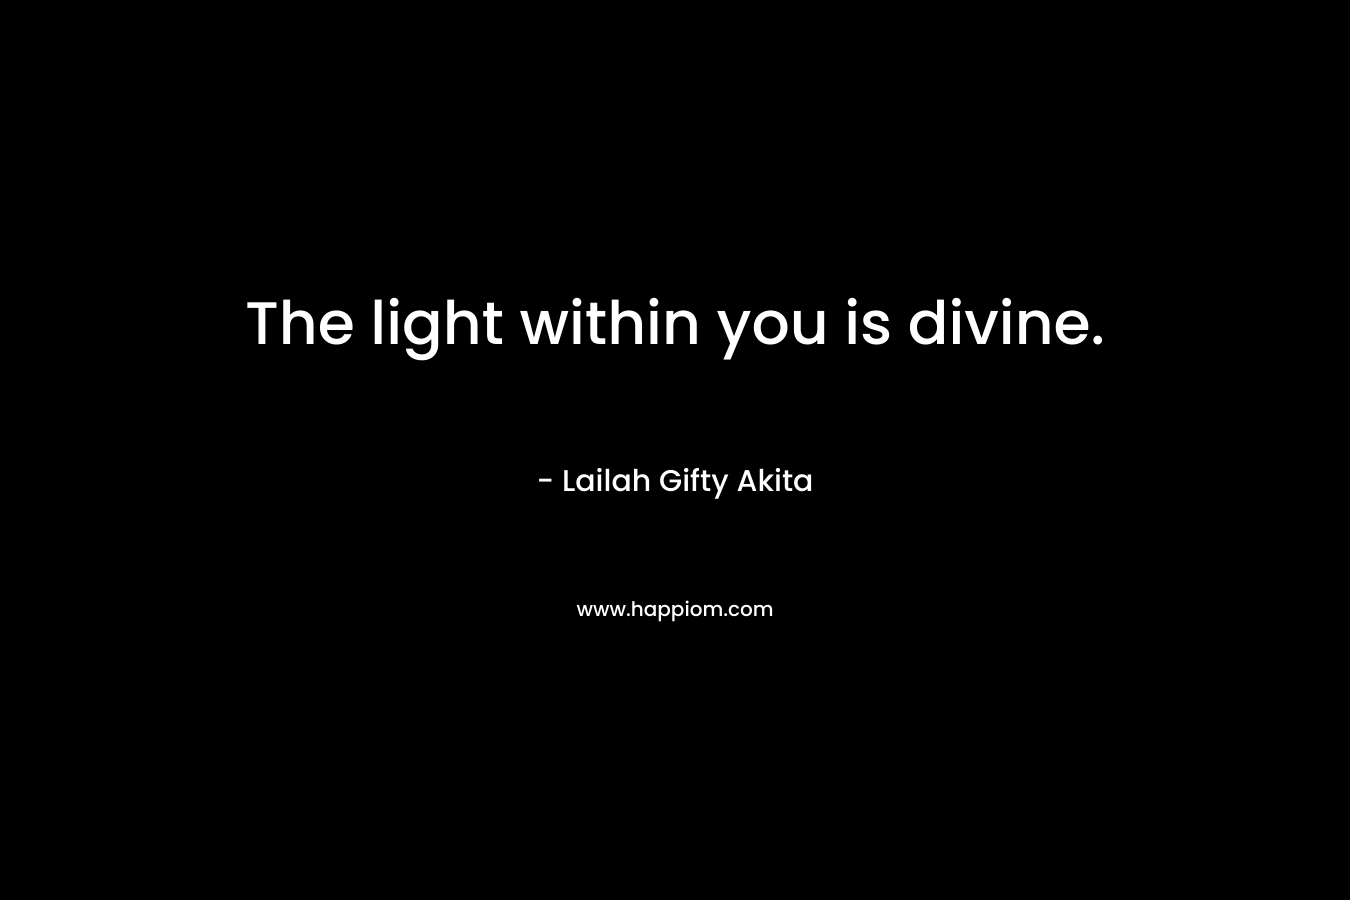 The light within you is divine.